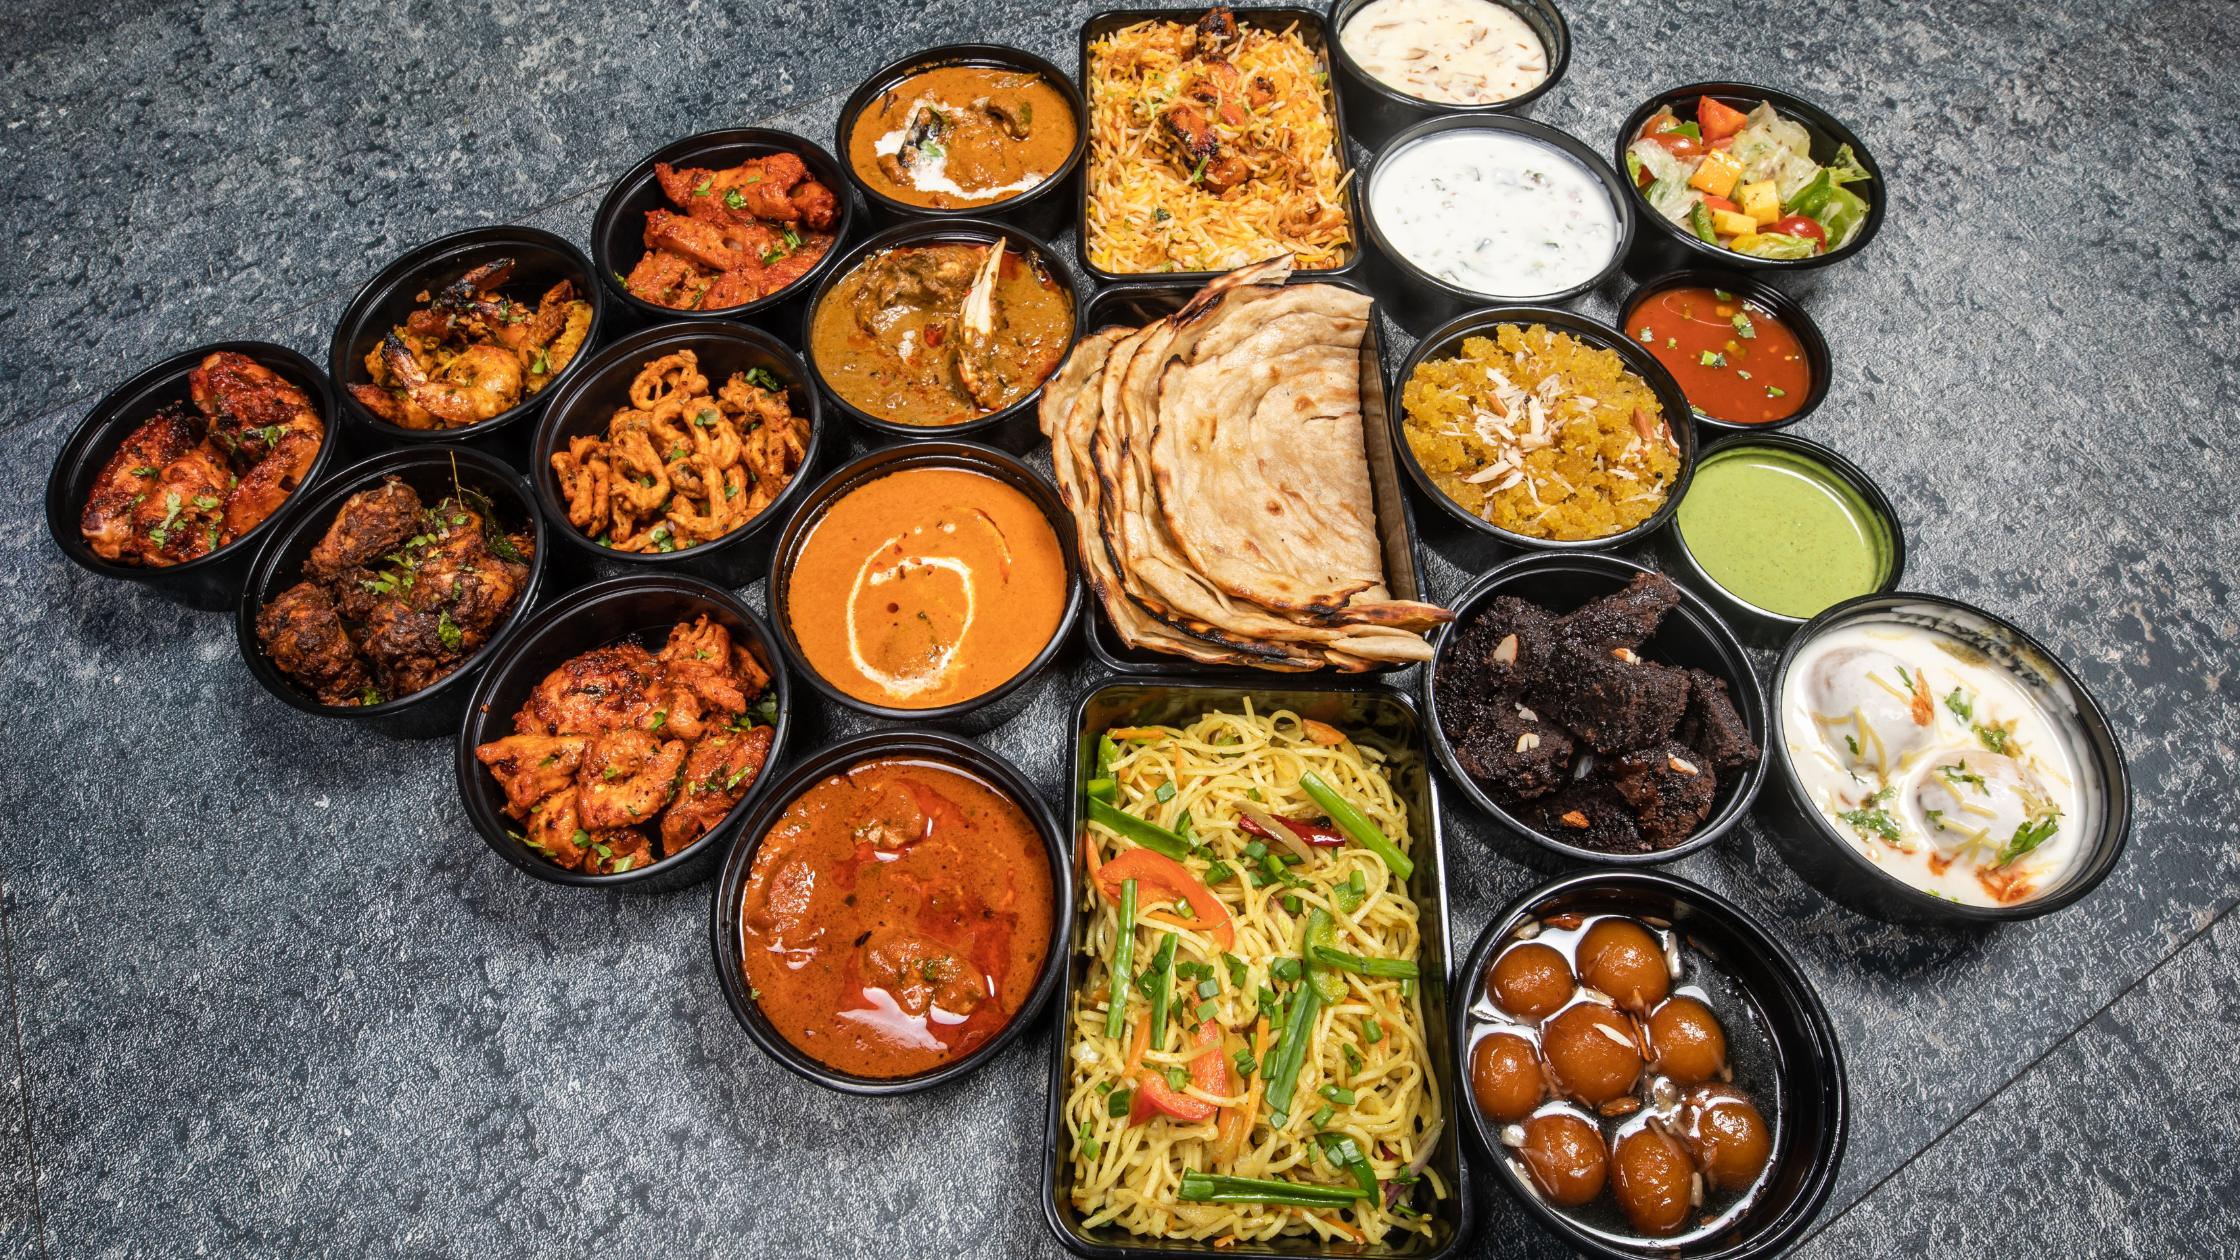 Unlimited food served in the Best Indian Restaurant in the US on Every Weekends